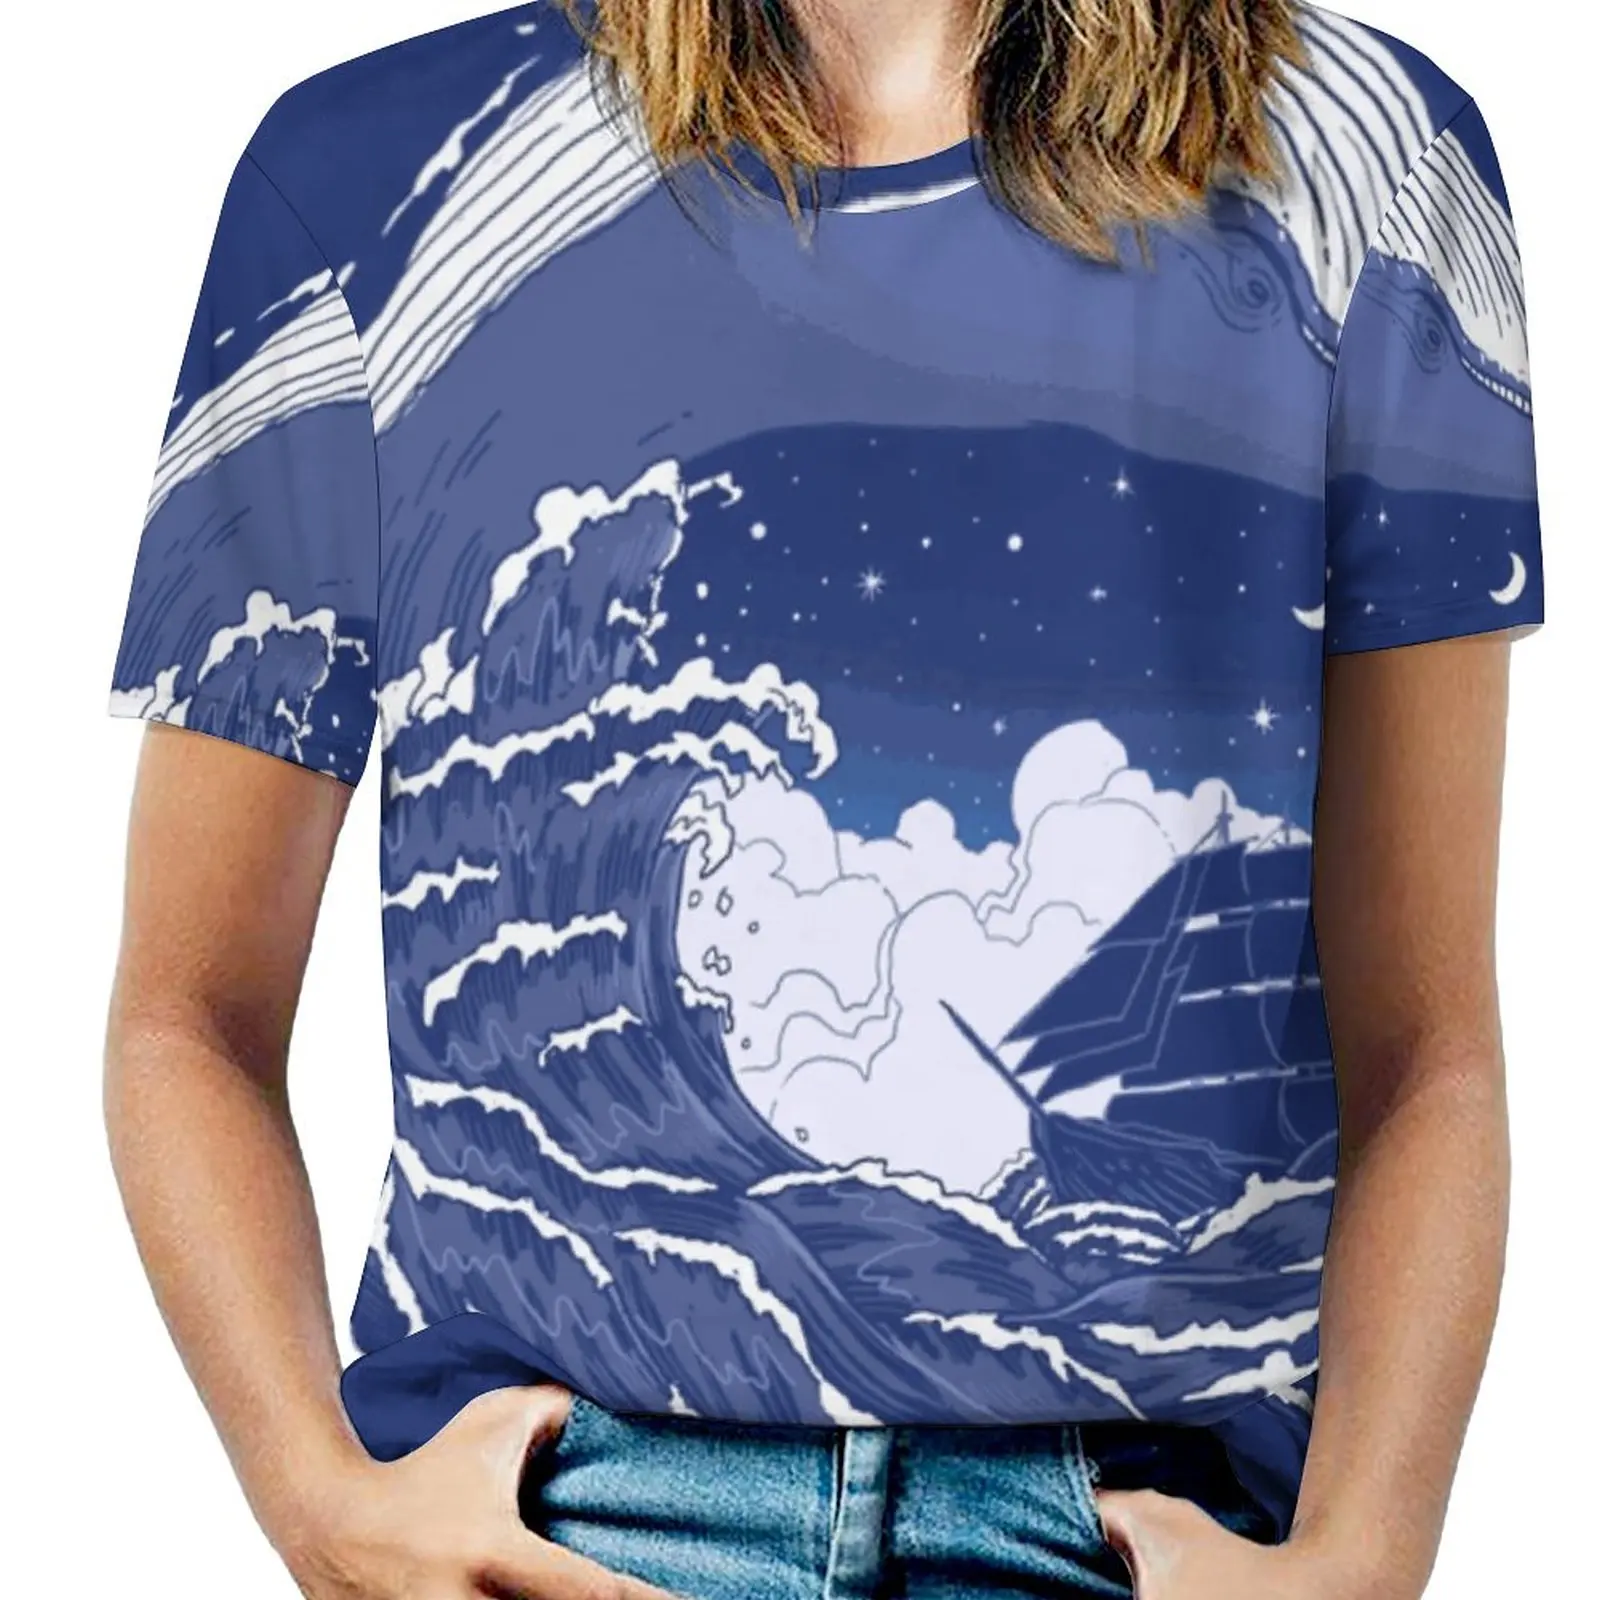 The Great Whale Women T-Shirt Crewneck Casual Short Sleeve Tops Summer Tees Animal Whale Ship Moon Wave Sea Blue Carbine